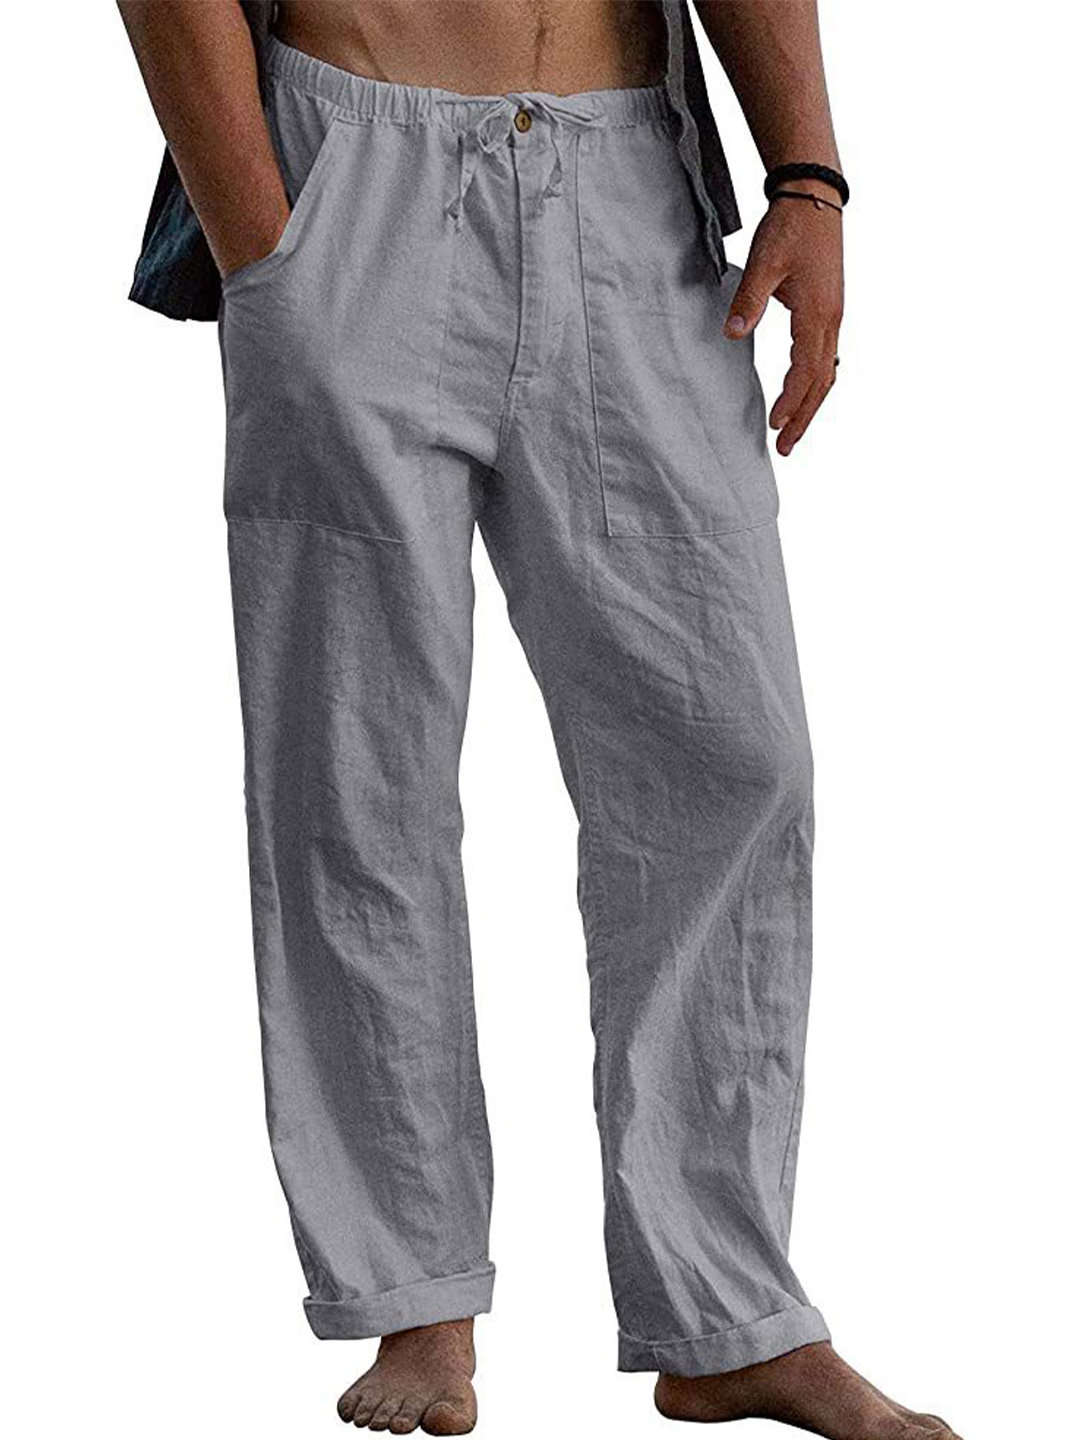 Men's Drawstring Breathable Outdoor Pants